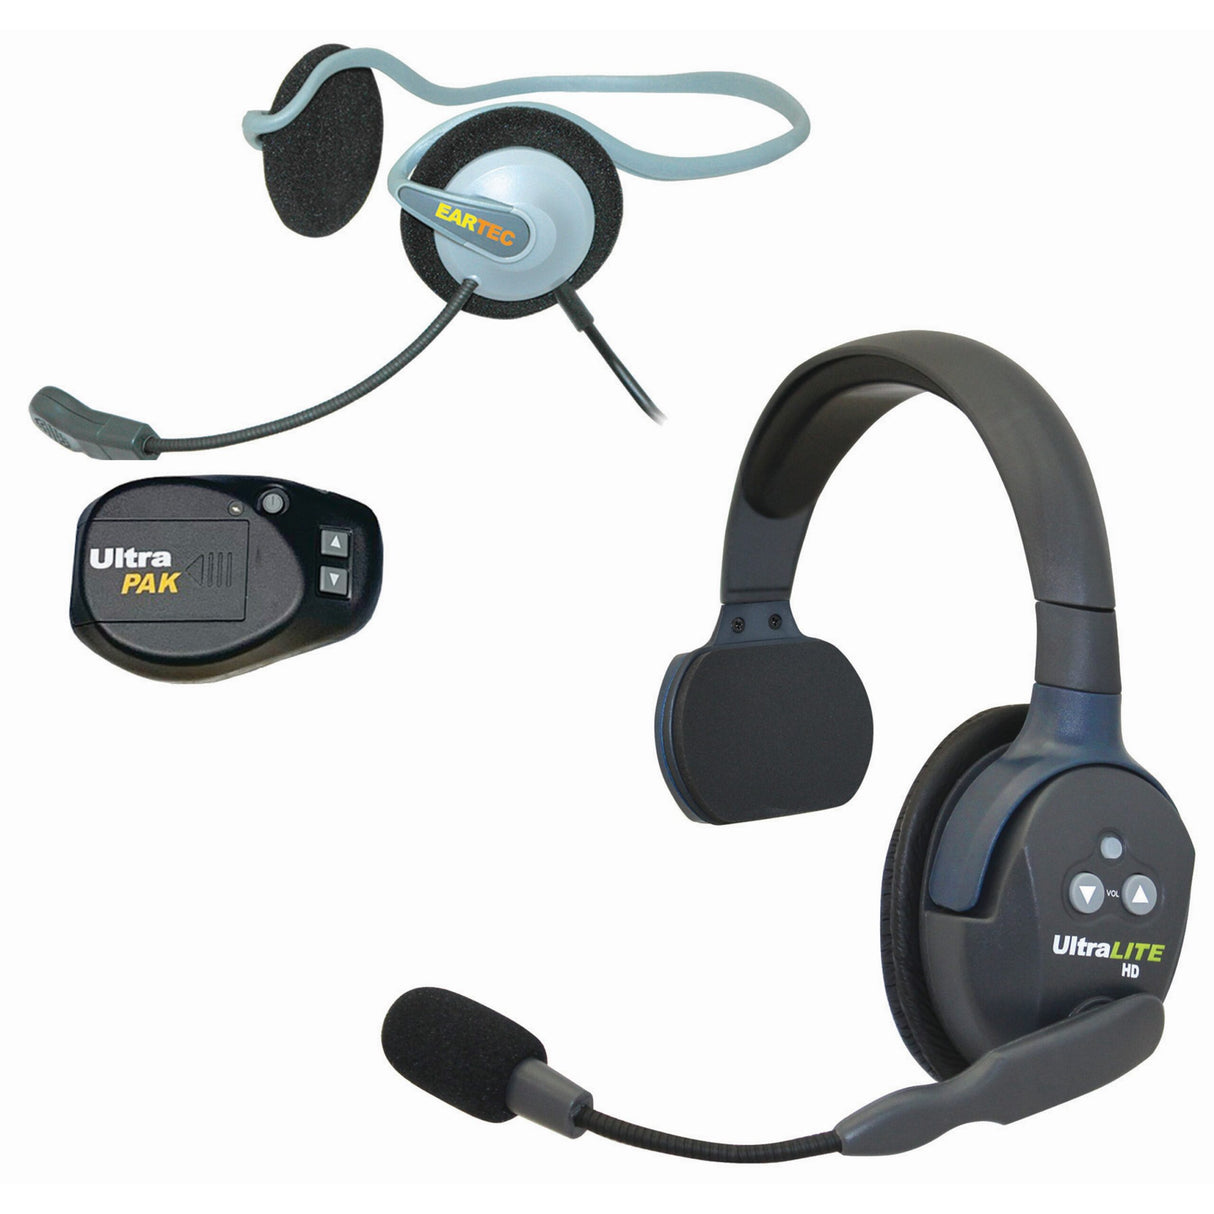 Eartec SMMON5 1 Single MAIN UltraLITE and 4 Monarch/UltraPAK Headsets